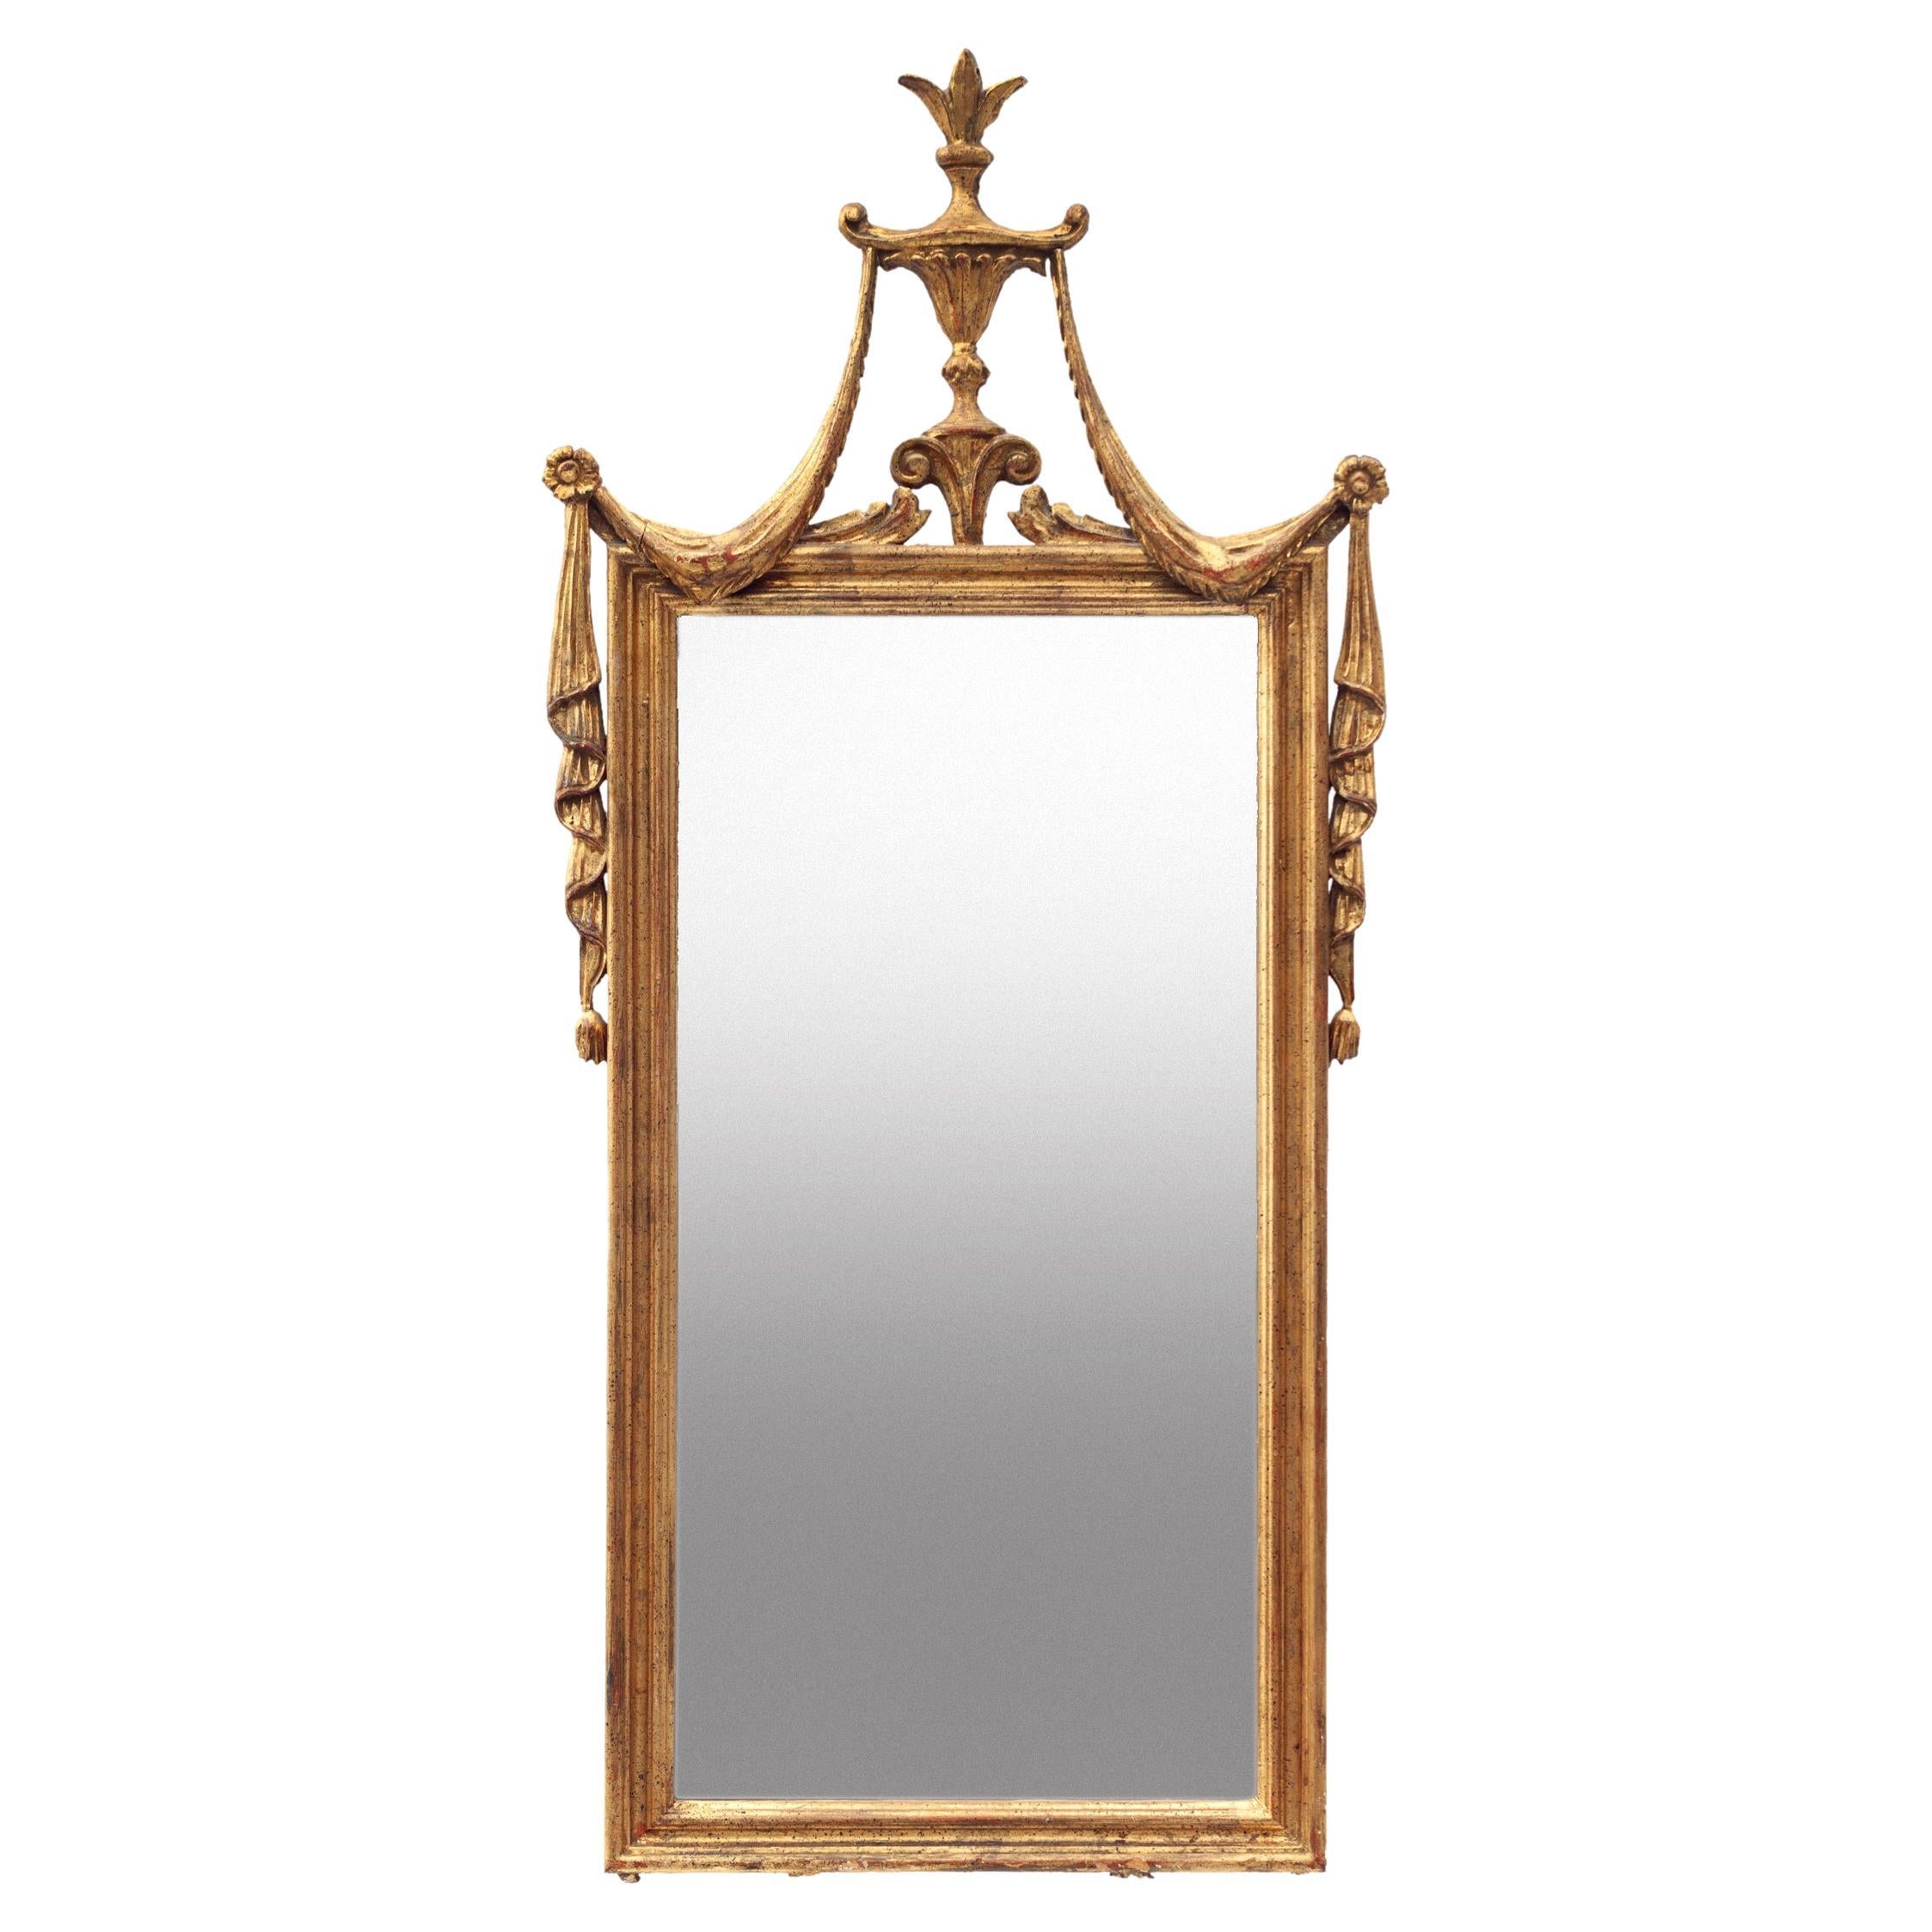 Italian Neoclassical Mirror with Urn & Swagged Drapery For Sale